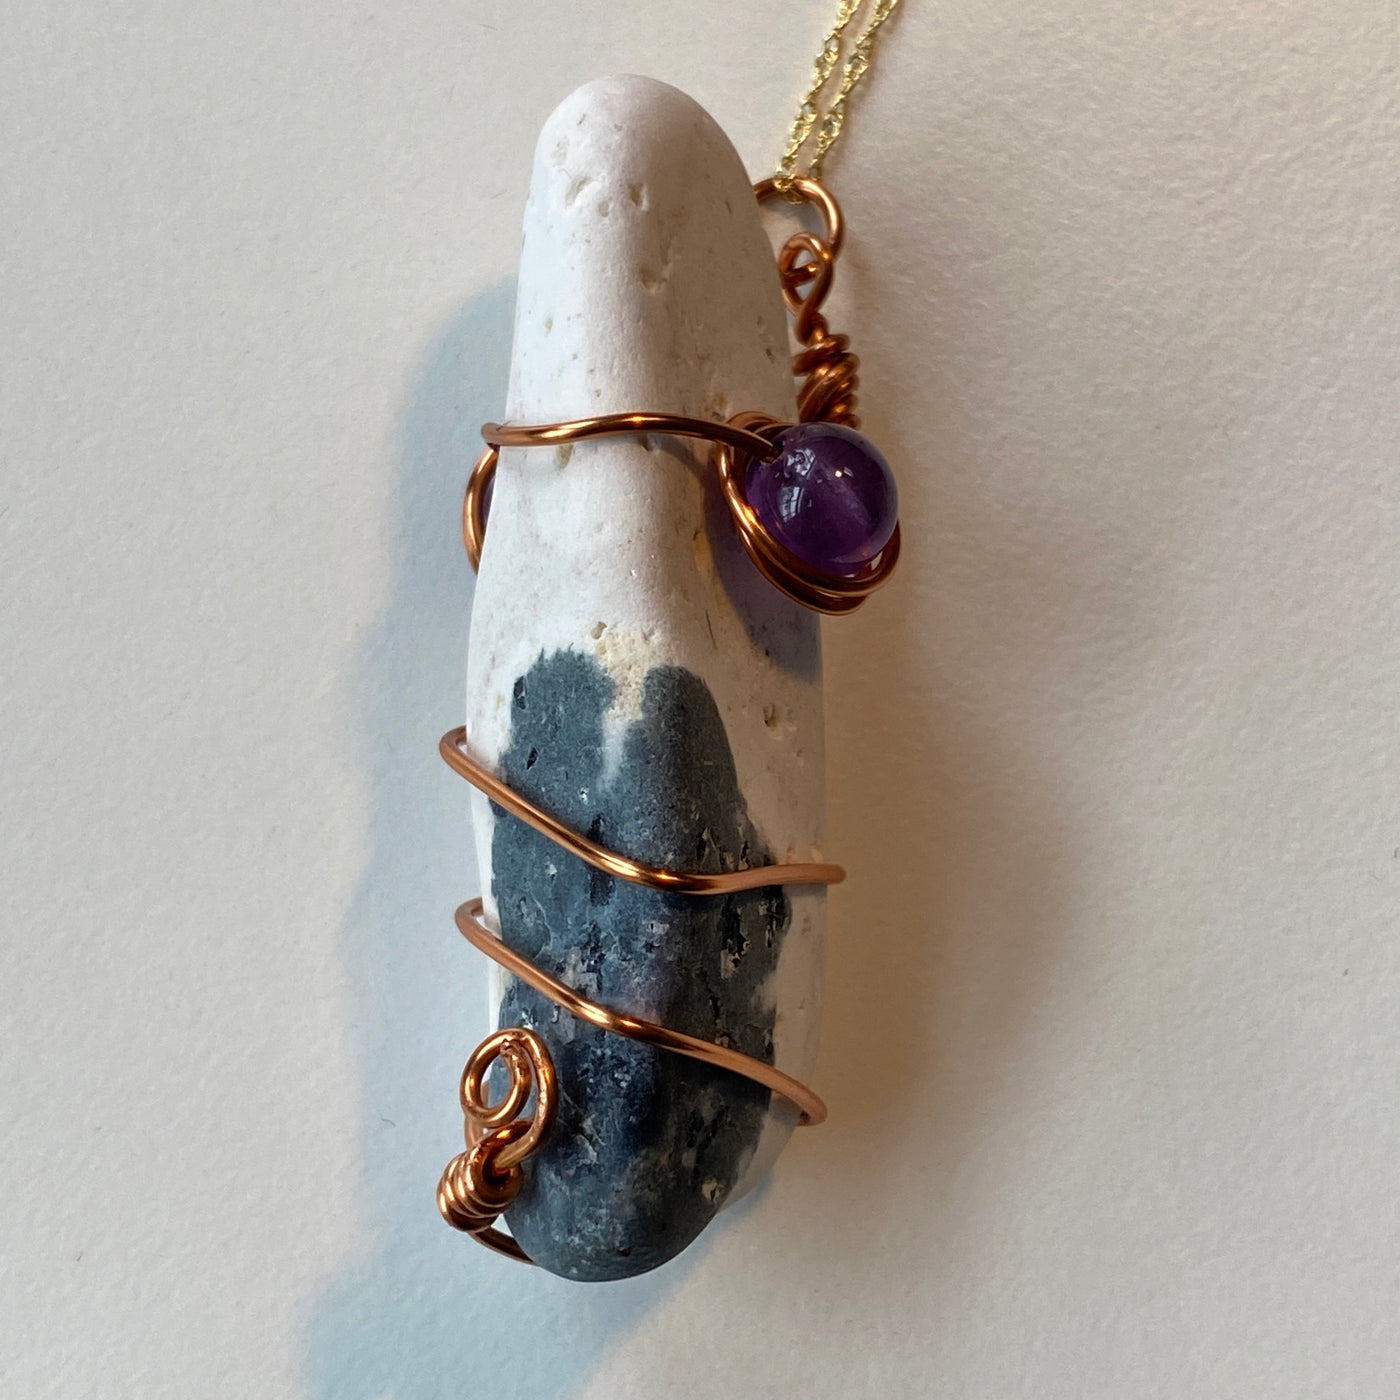 White and grey natural stone and amethysts on wire pendant. Elbastones